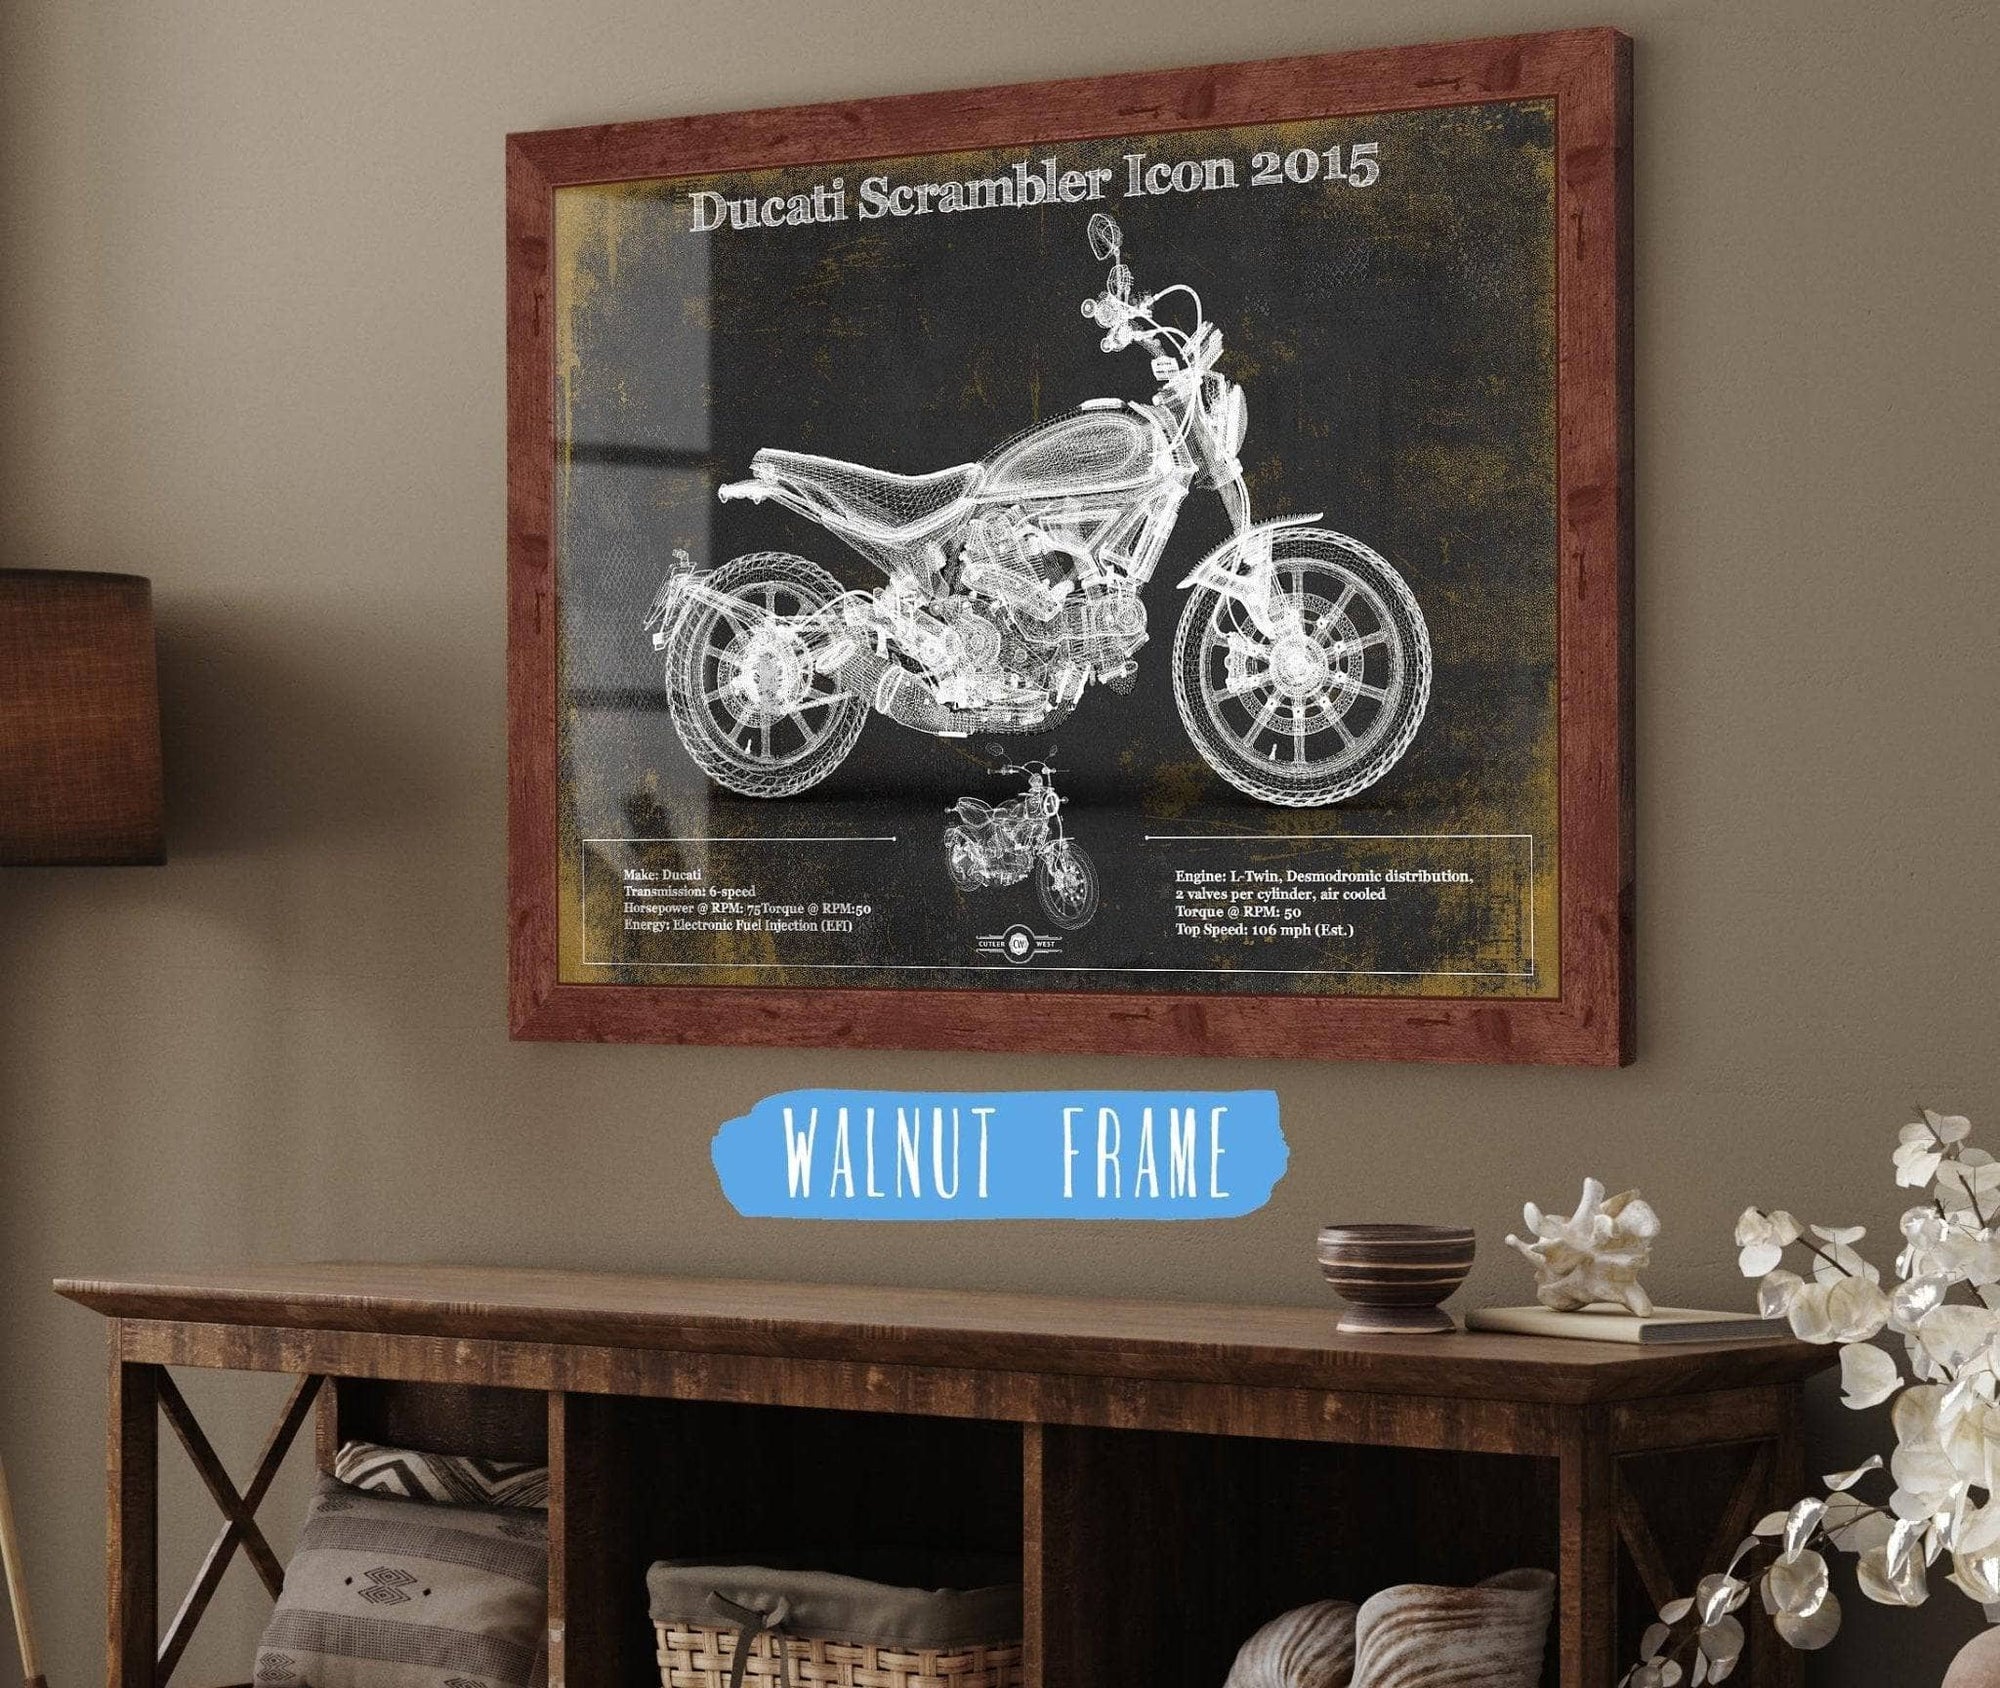 Cutler West Best Selling Collection Ducati Scrambler Icon 2015 Vintage Blueprint Motorcycle Patent Print